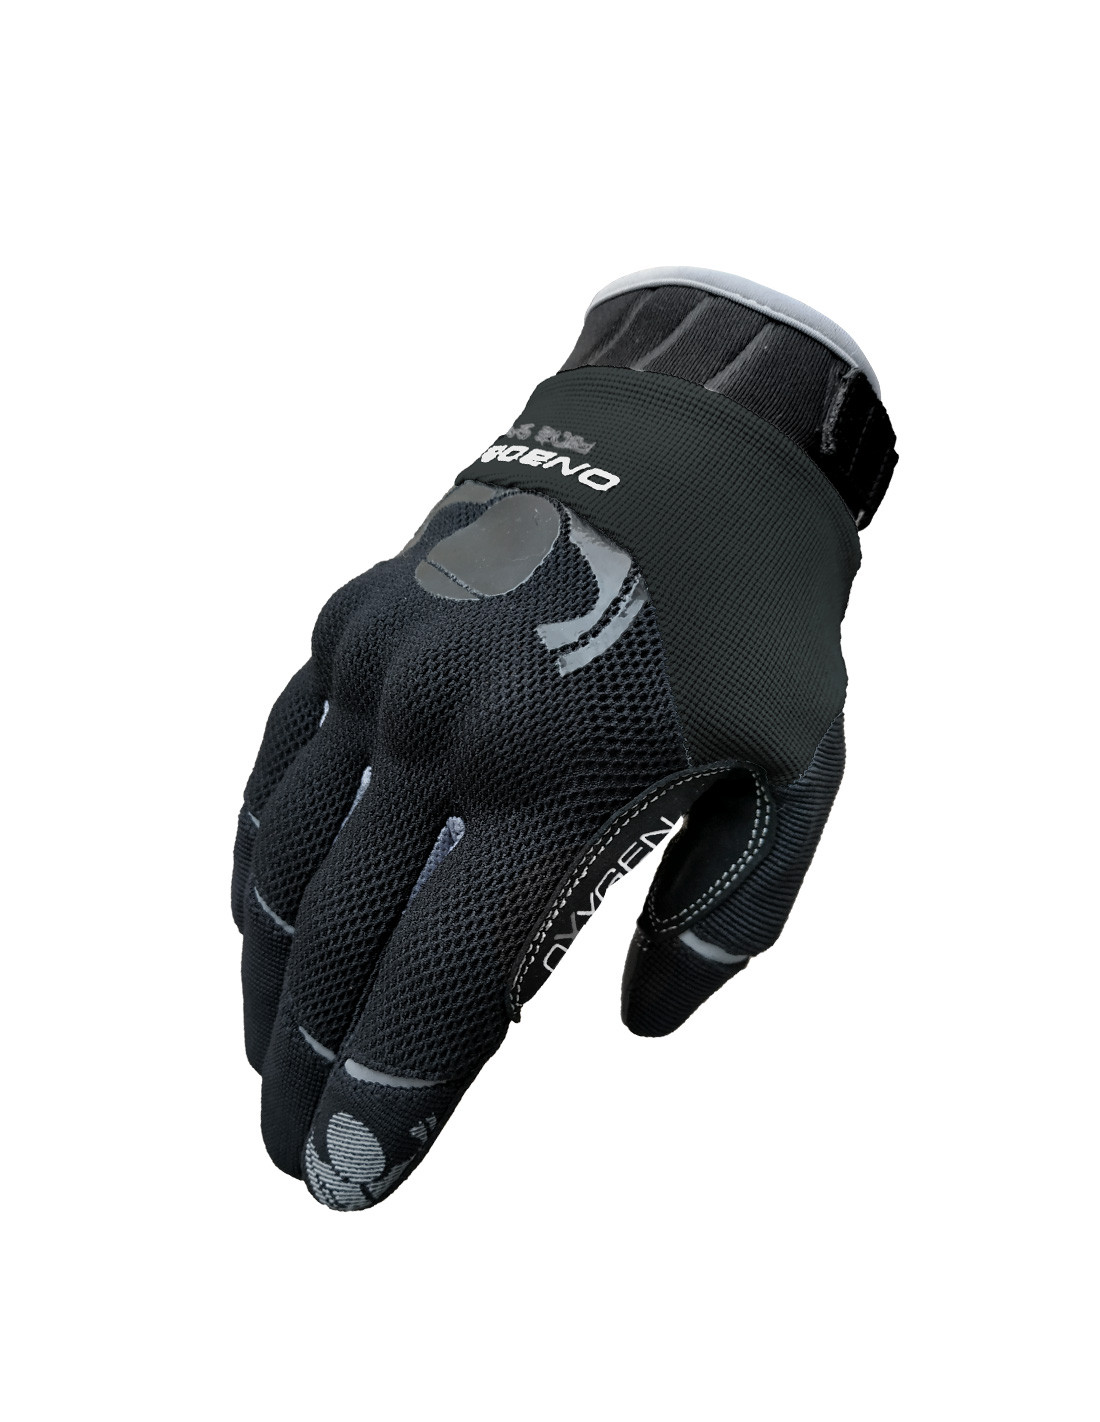 /862-thickbox_default/guantes-oxyge